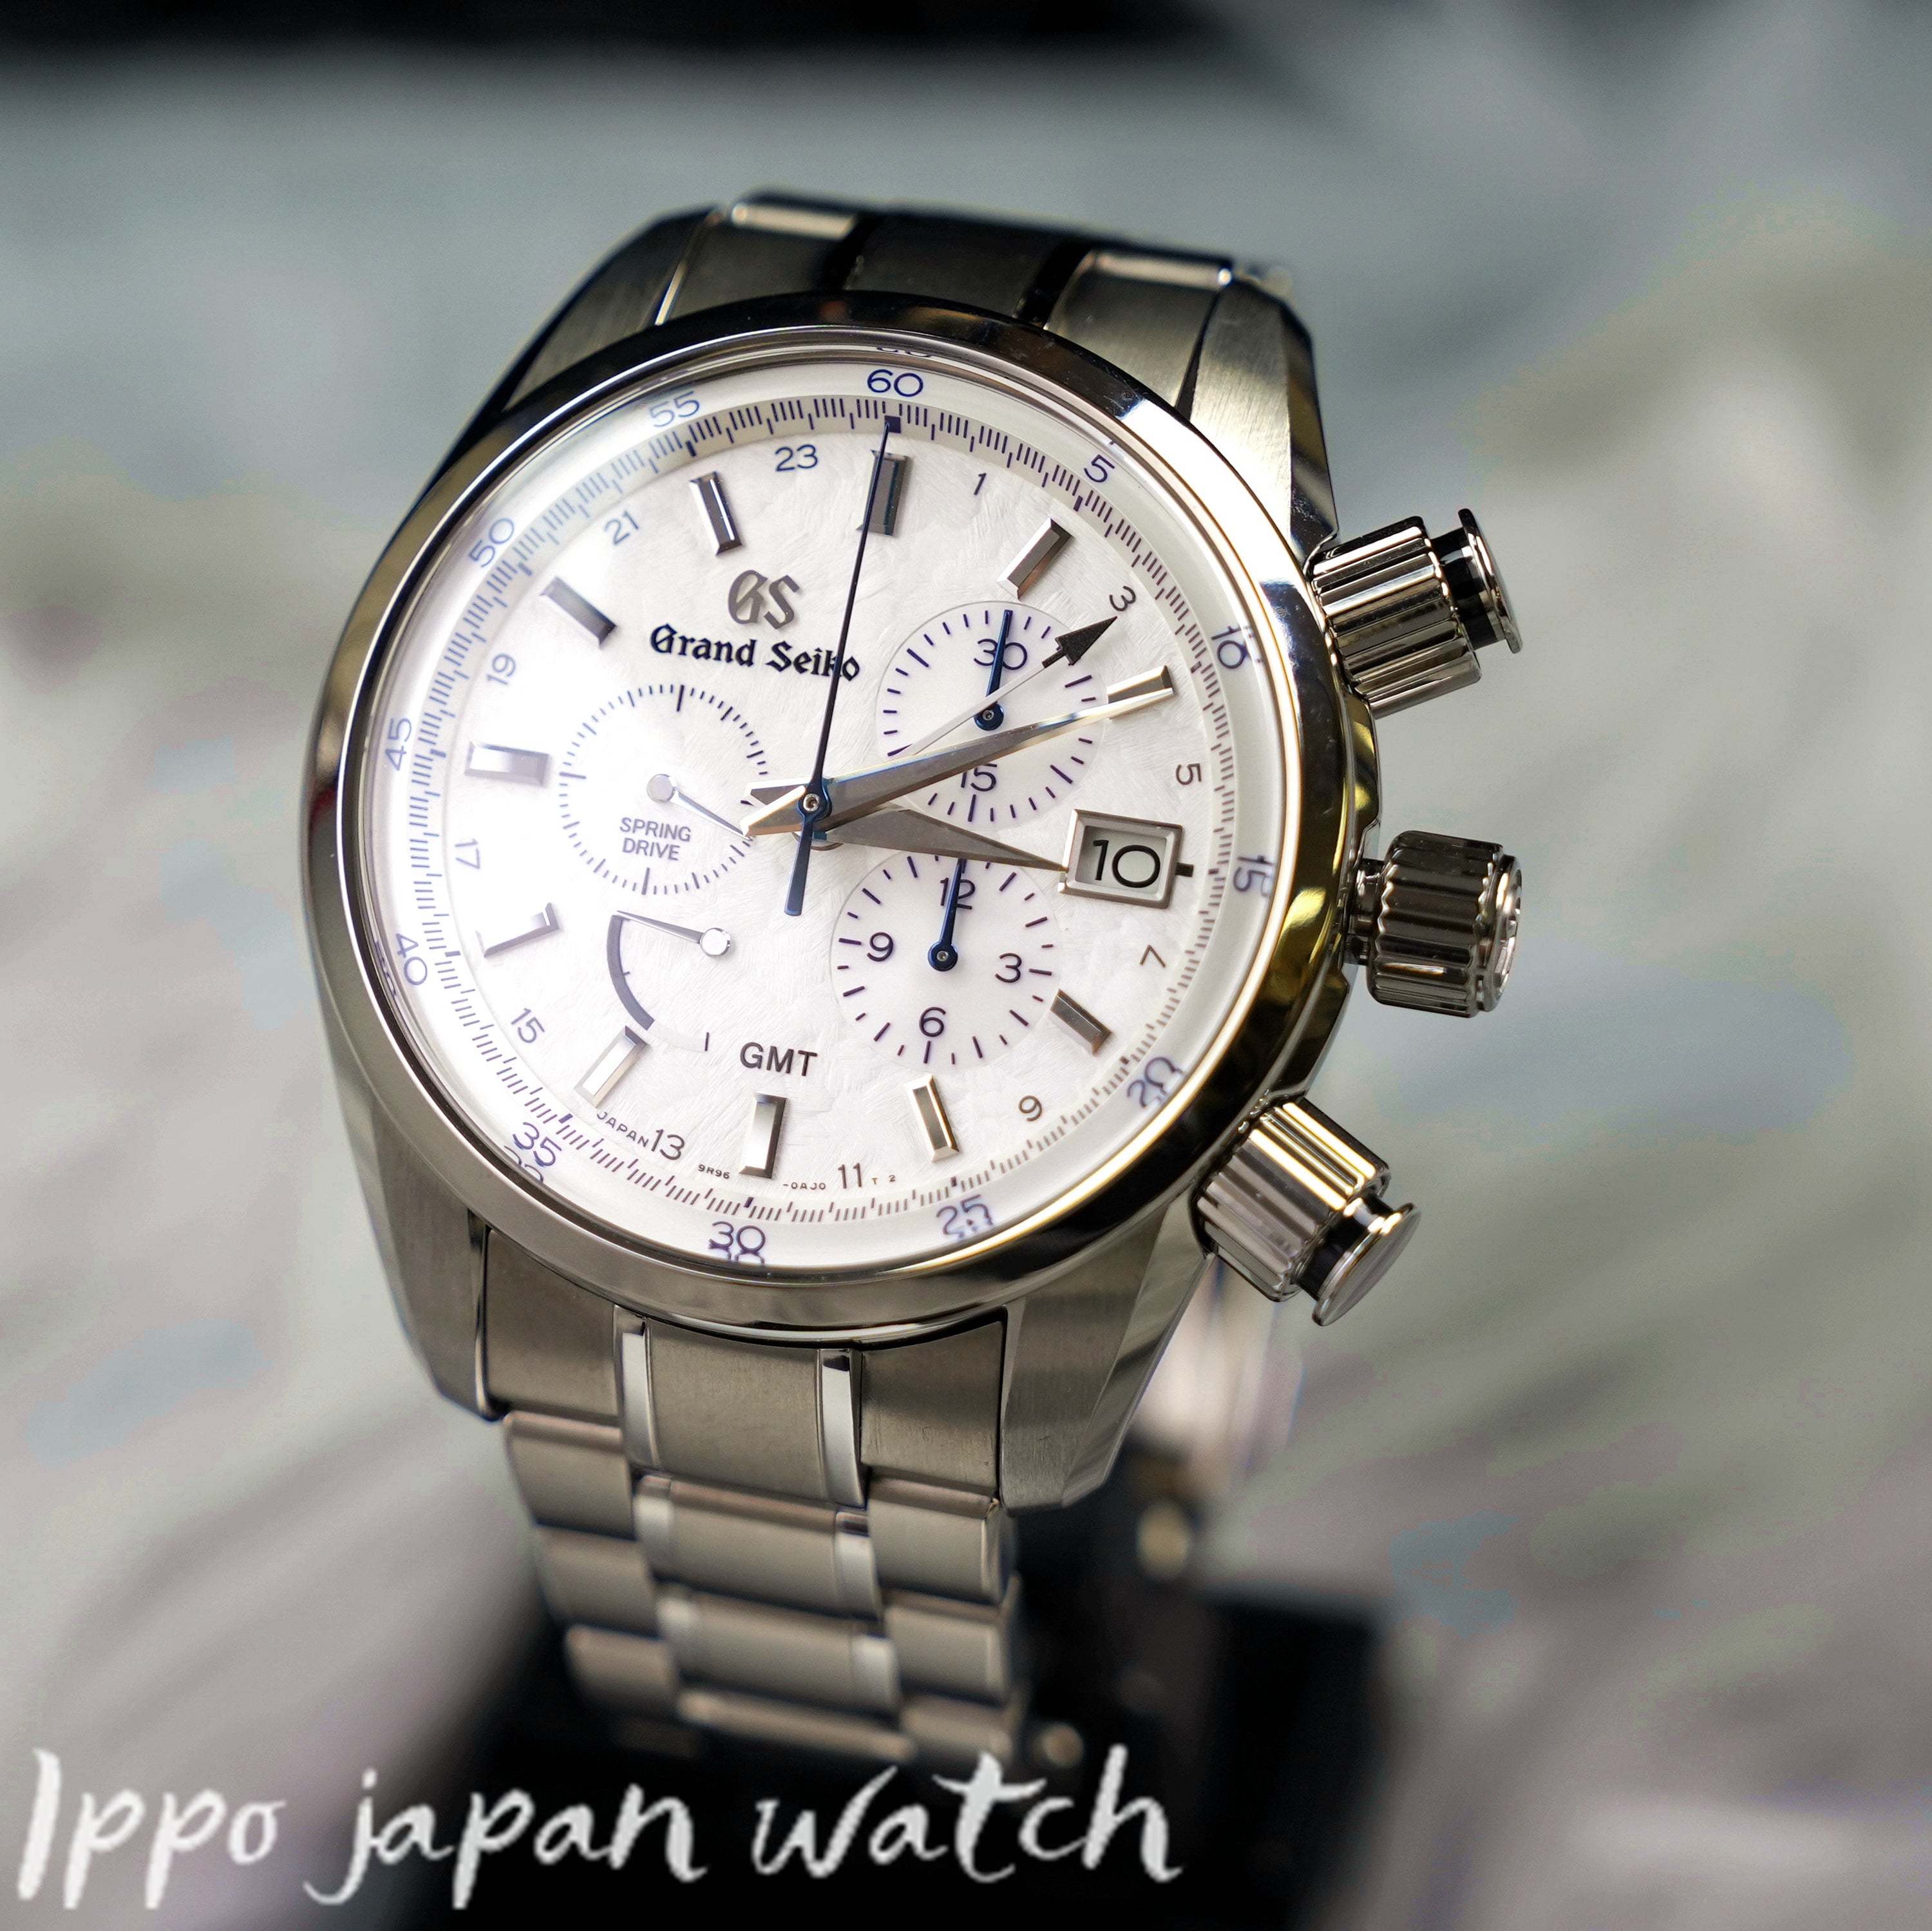 Grand Seiko Sport Collection SBGC247 Limited to 700 worldwide watch - IPPO JAPAN WATCH 